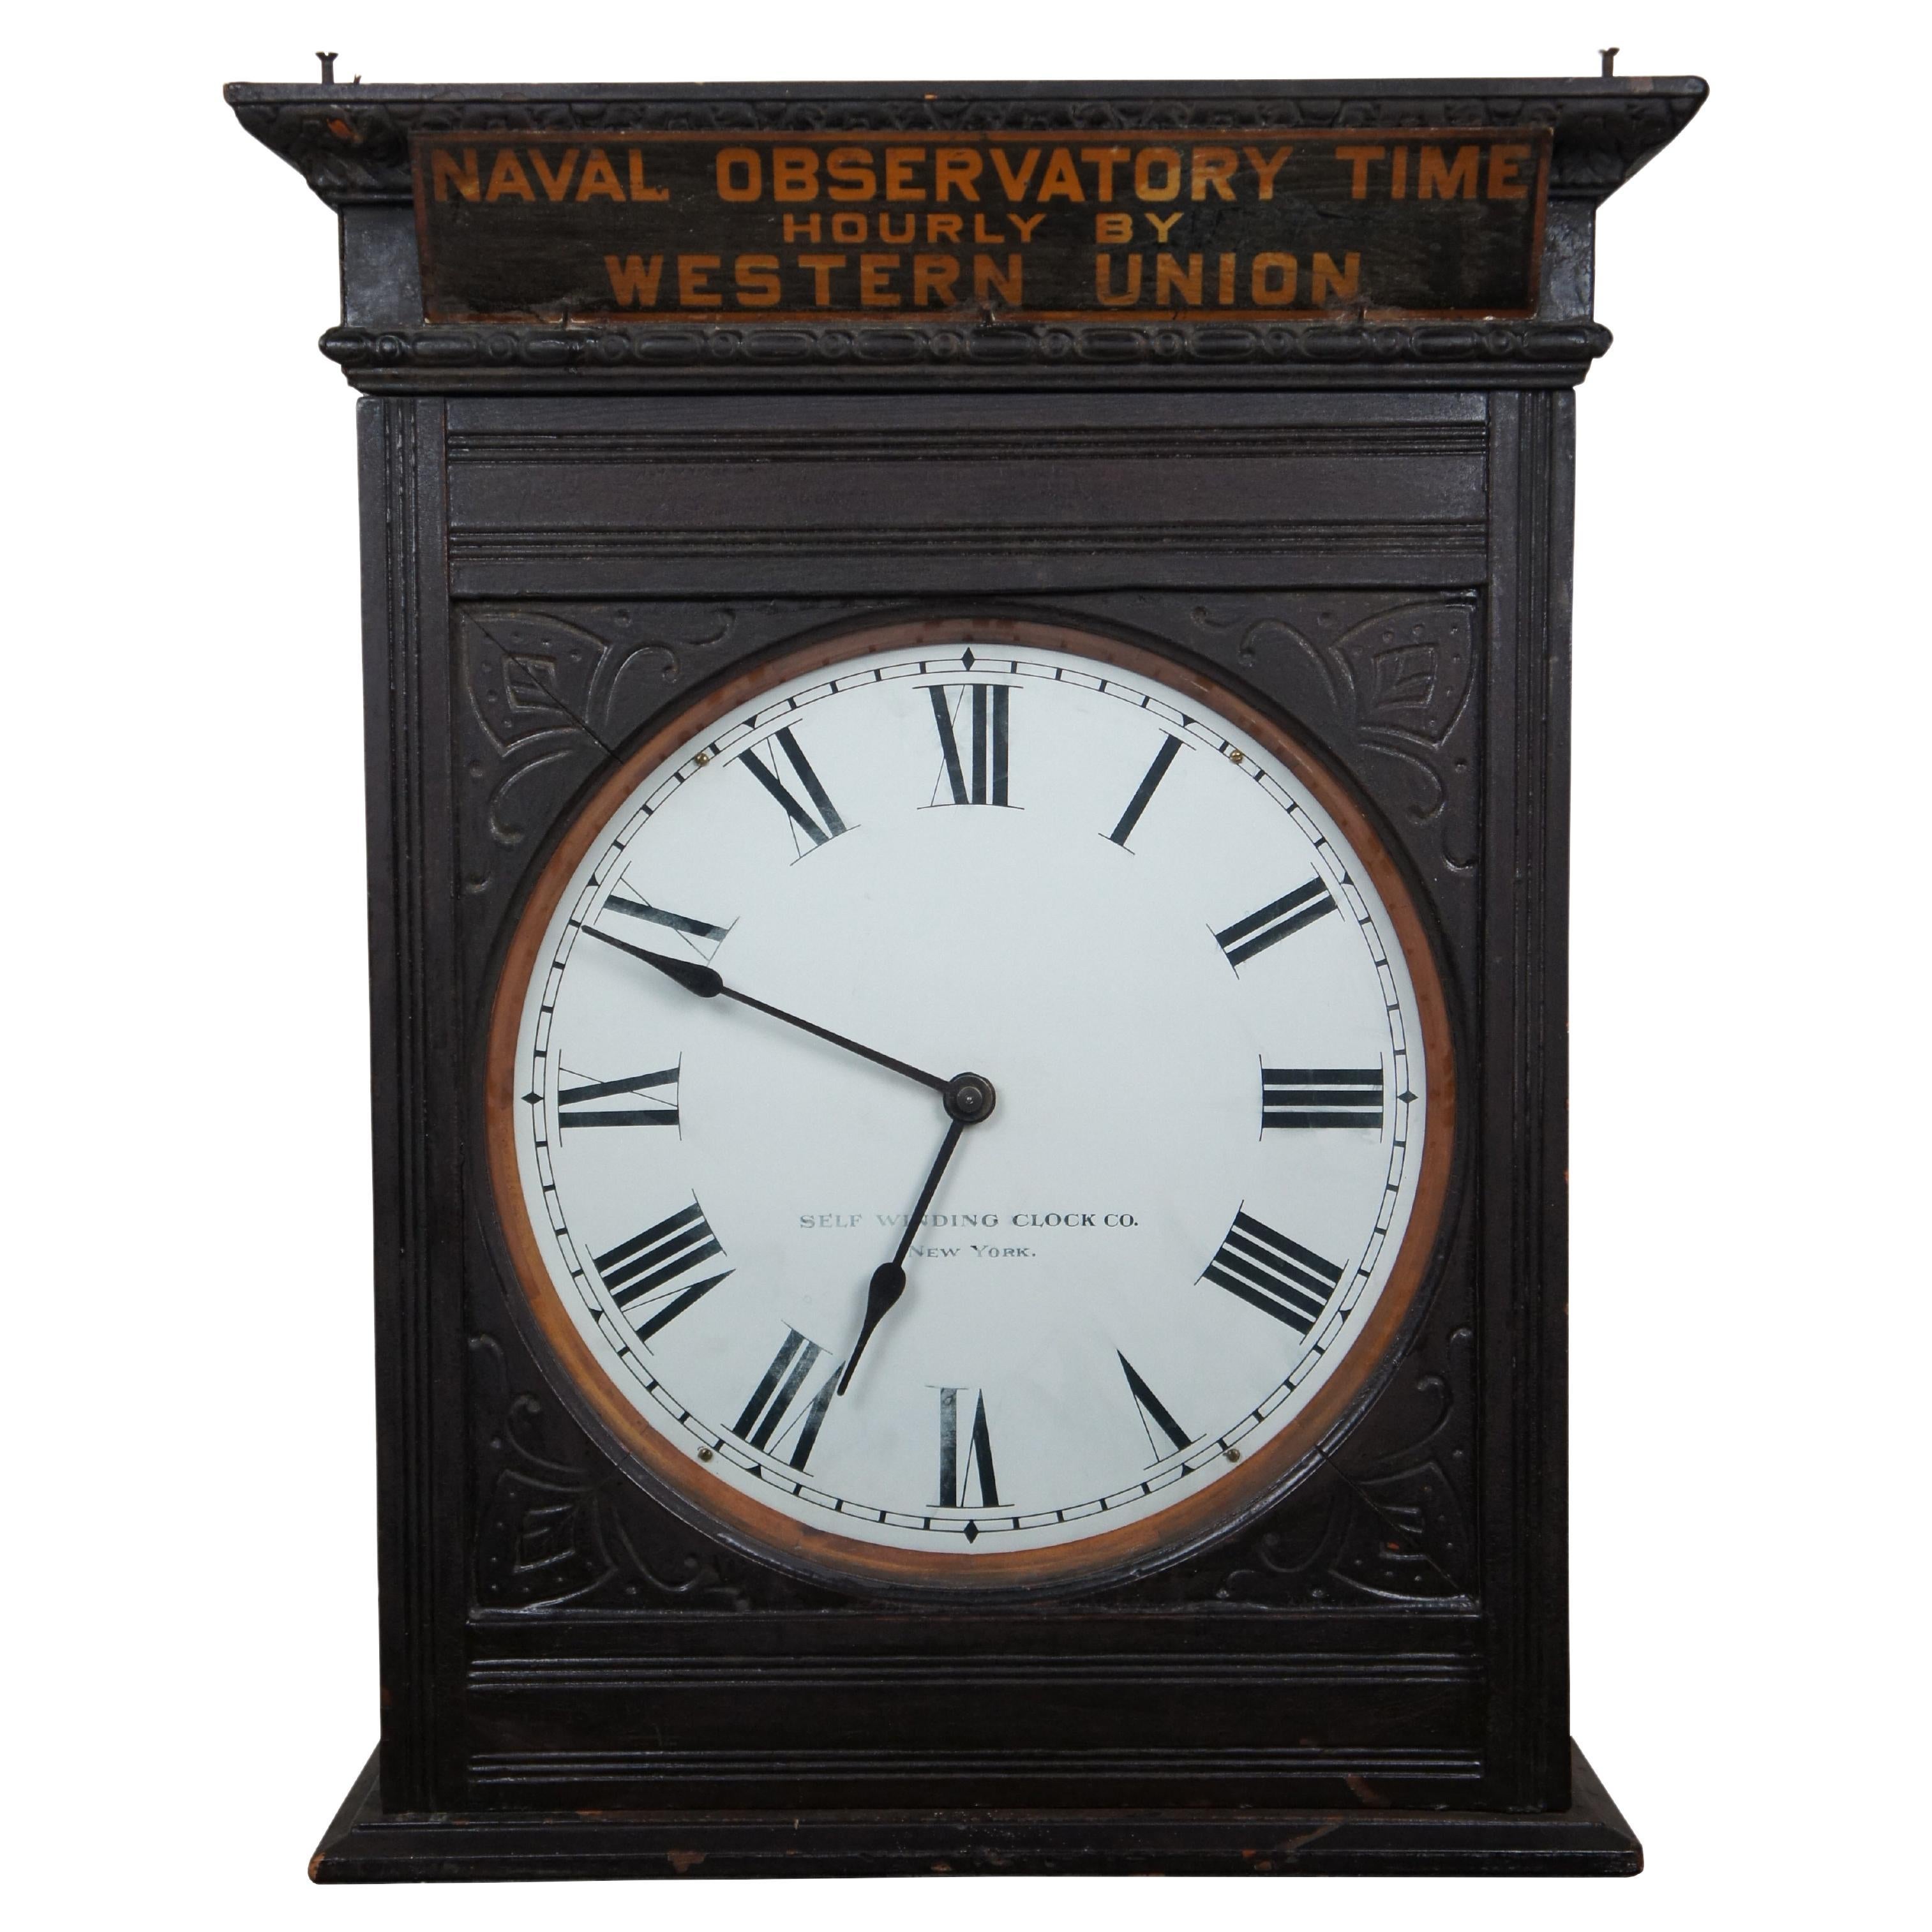 Rare Self Winding Clock Co Naval Observatory Time Western Union Wall Clock 26" For Sale